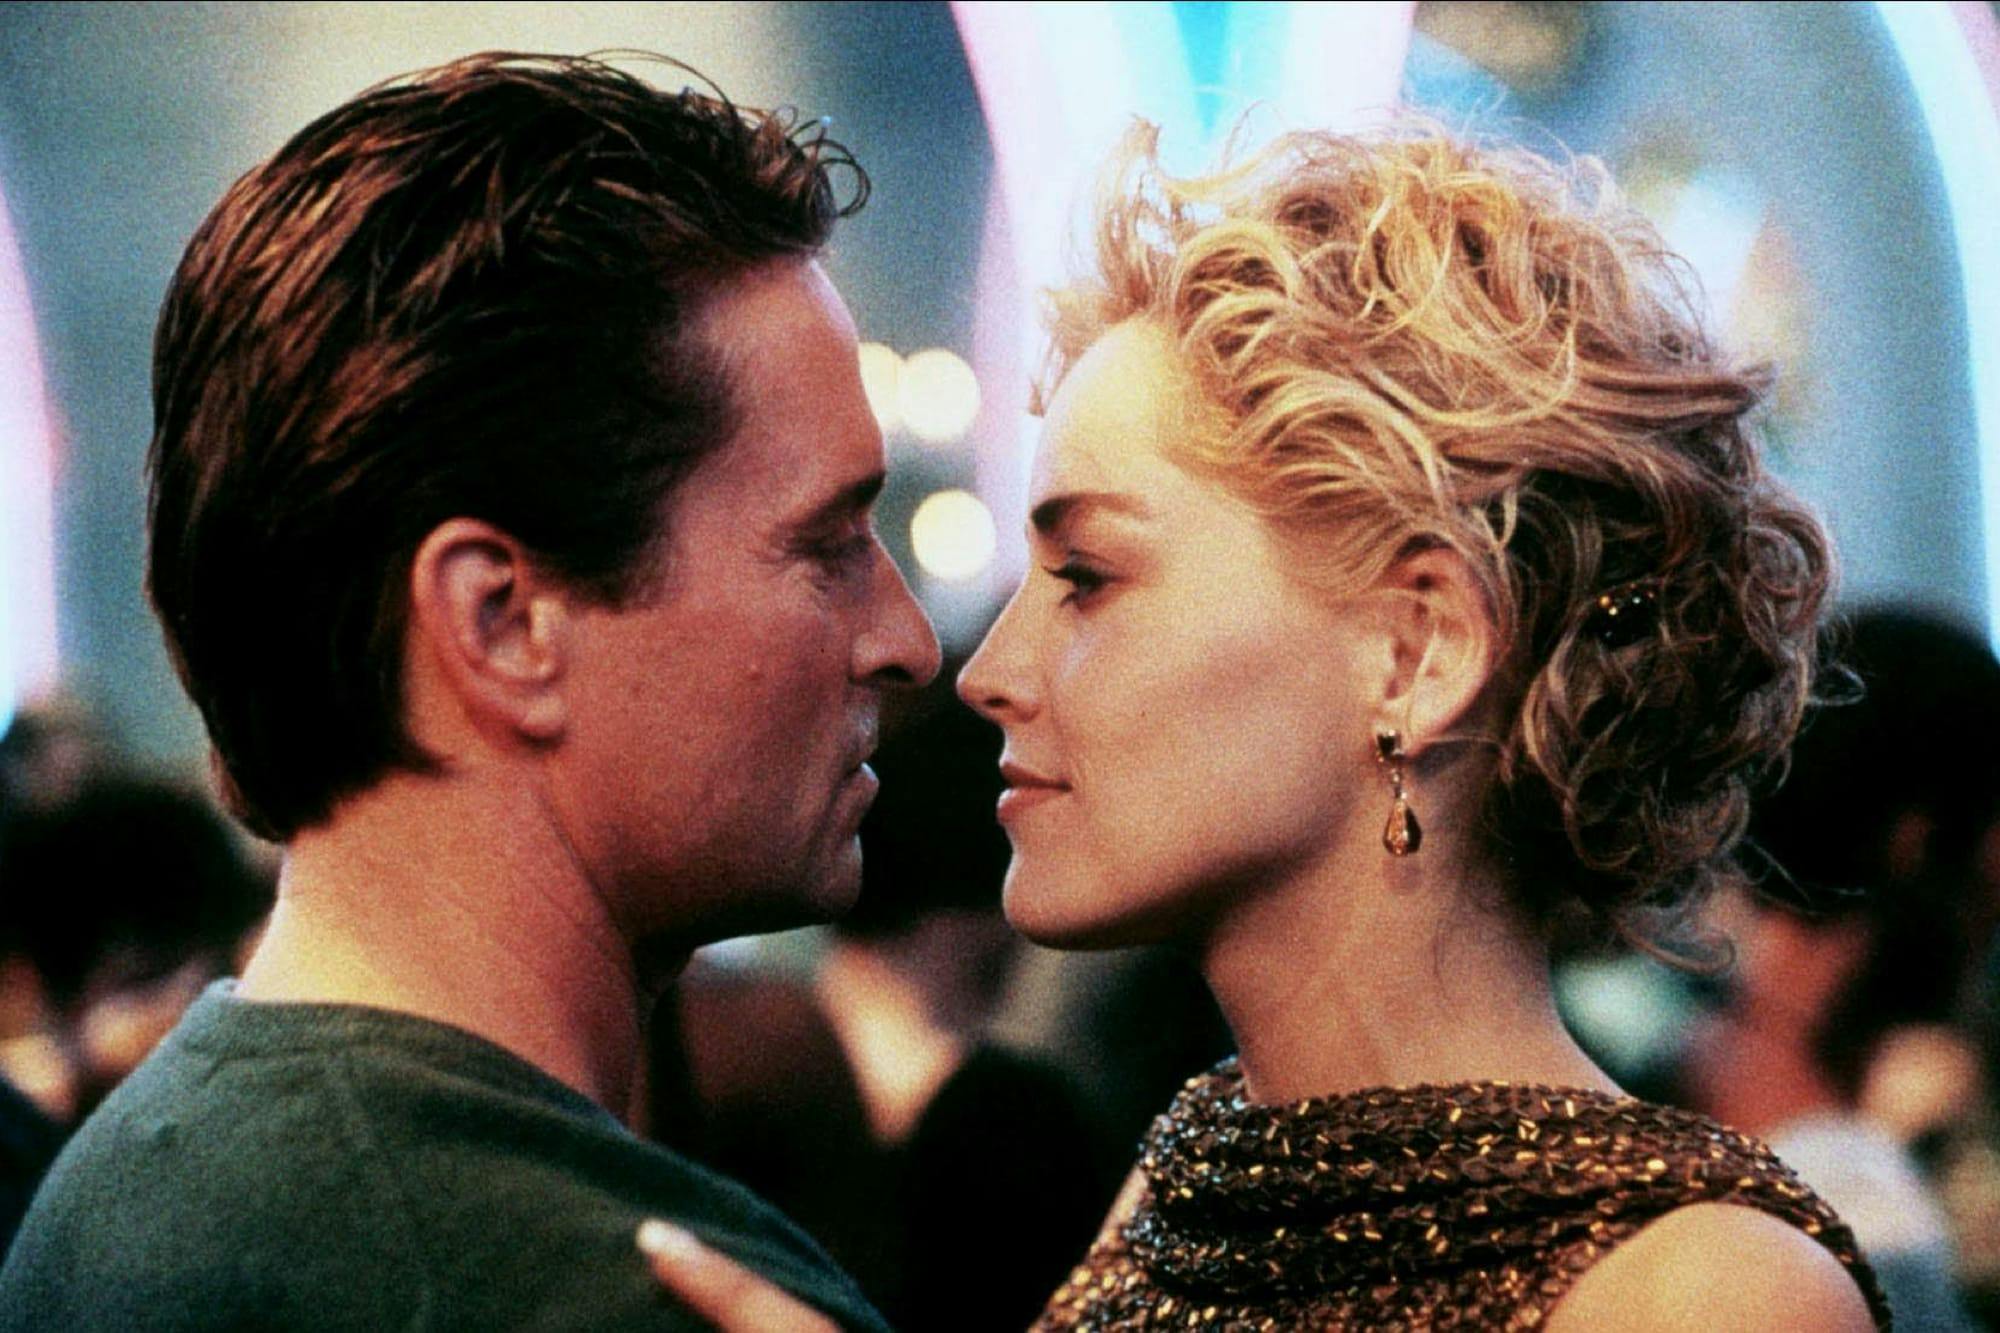 Detective Nick Curran (Michael Douglas) and Catherine Tramell (Sharon Stone) in Basic Instinct stand close together as they dance. Douglas wears a green sweater and Stone wears a sequined top.